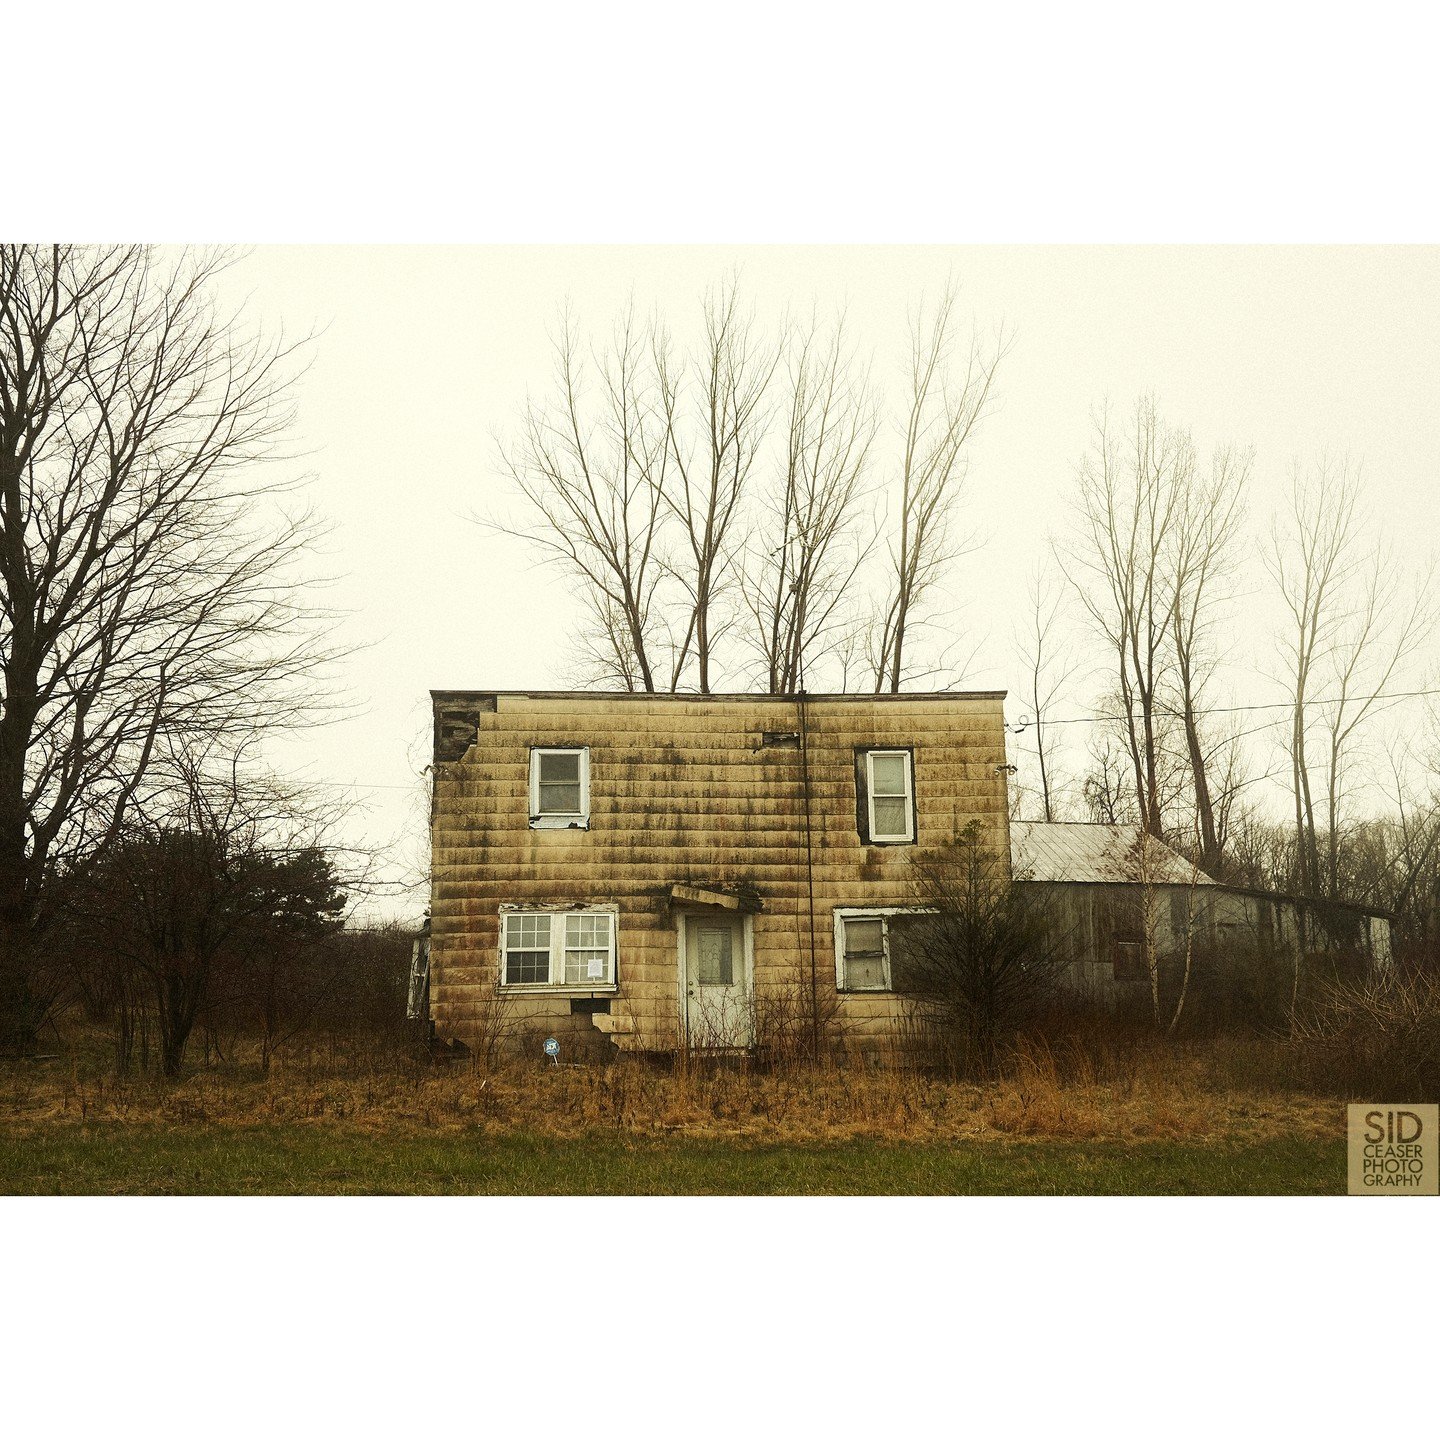 We had left Niagara and it was raining and I didn't think I'd ever find anything to photograph, and we got off on a side road somewhere near Ripley, New York, and suddenly this little square-ish house was sitting there on the side of the road.

I did